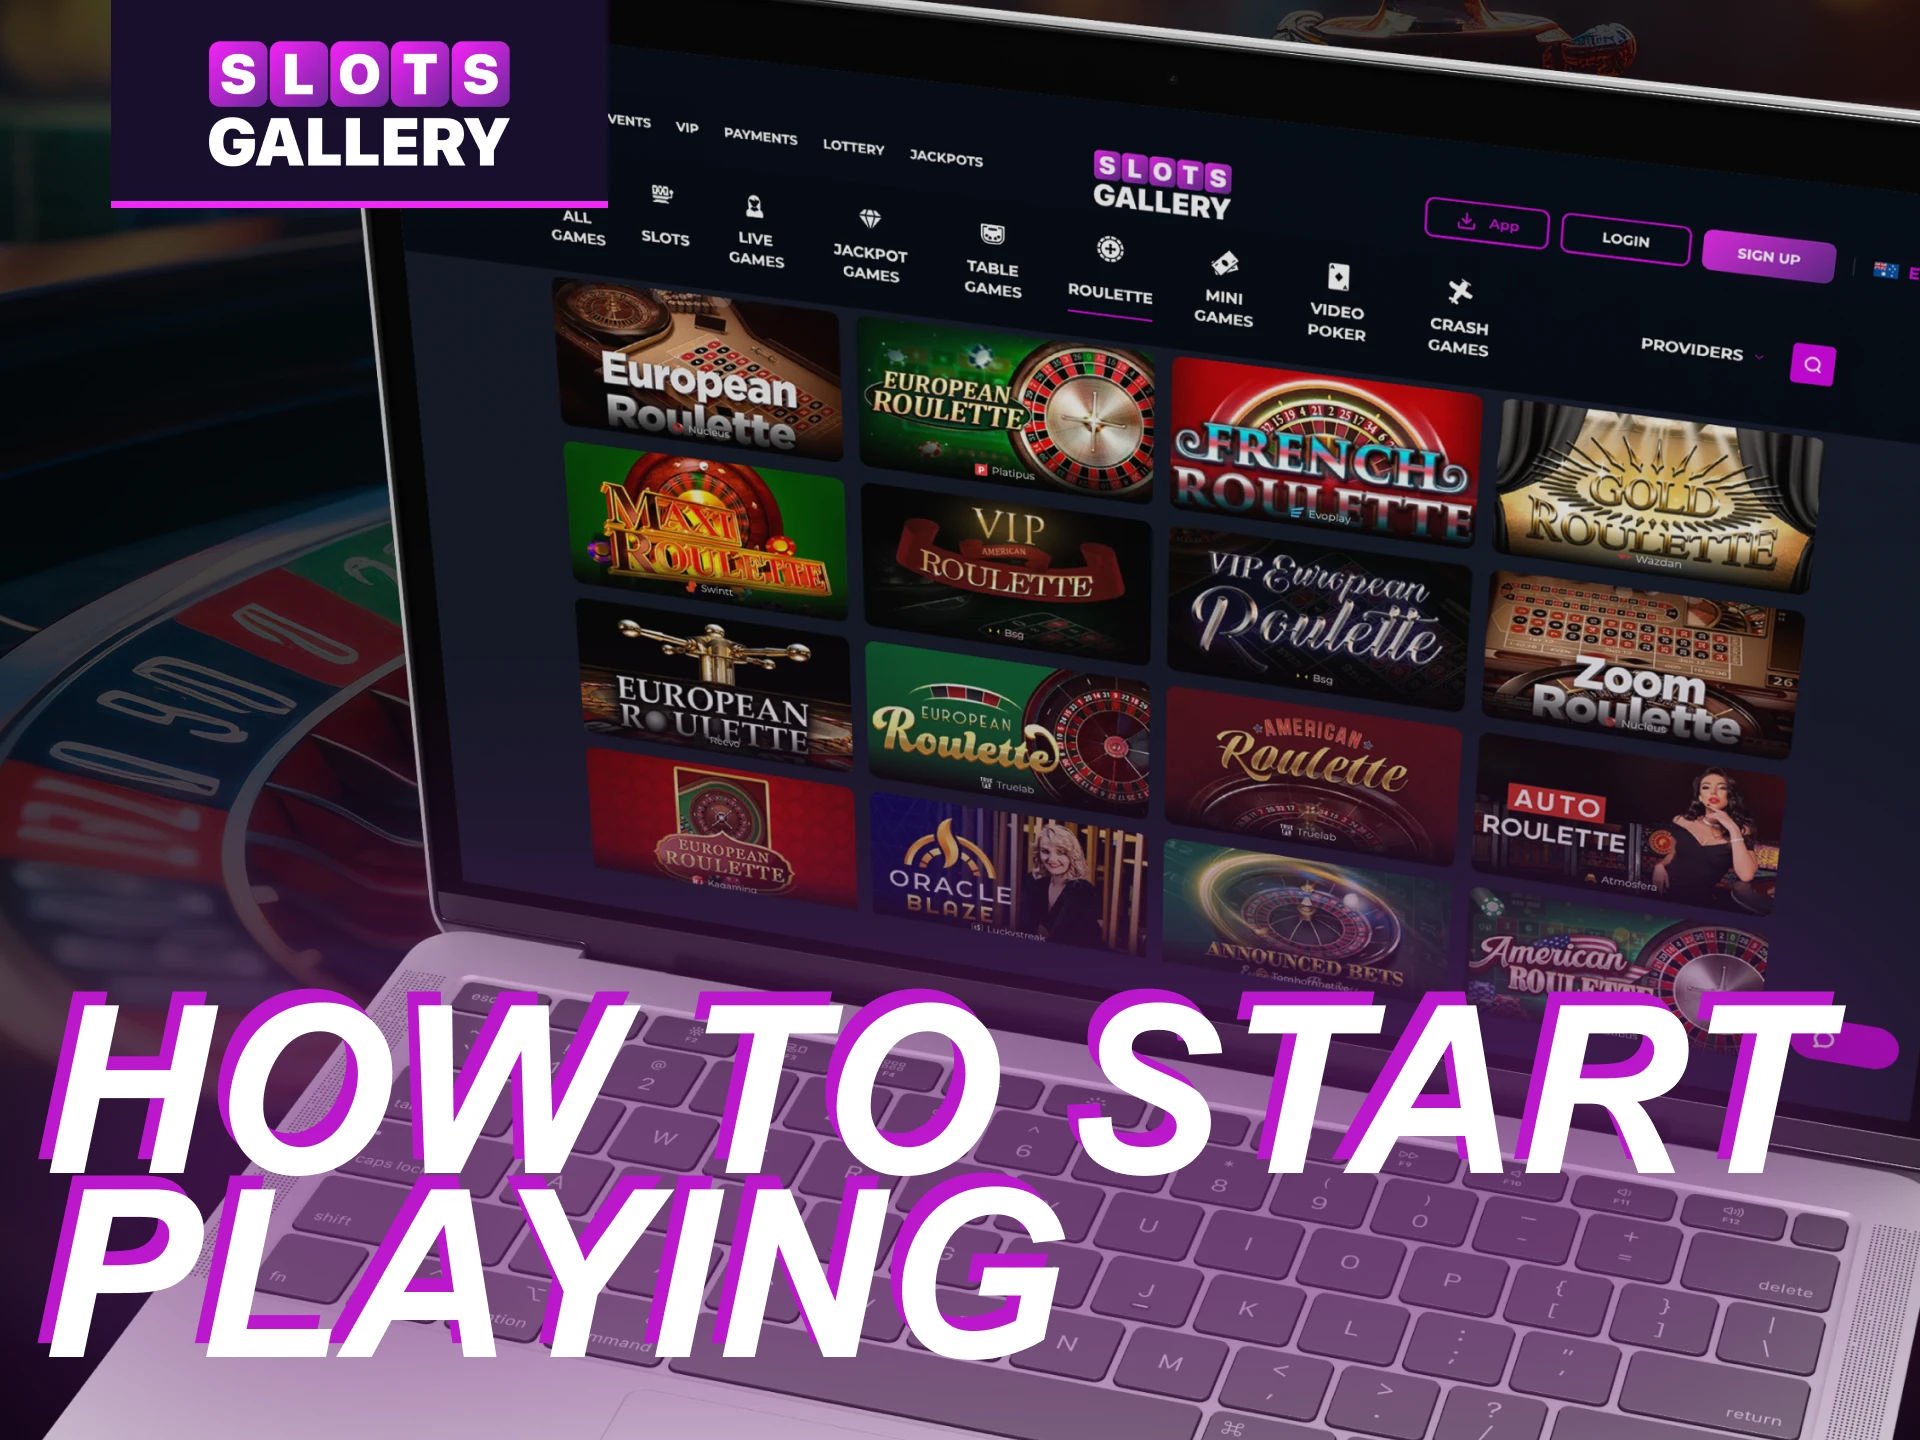 Instructions for players on how to start playing roulette games are available in the online casino Slots Gallery.